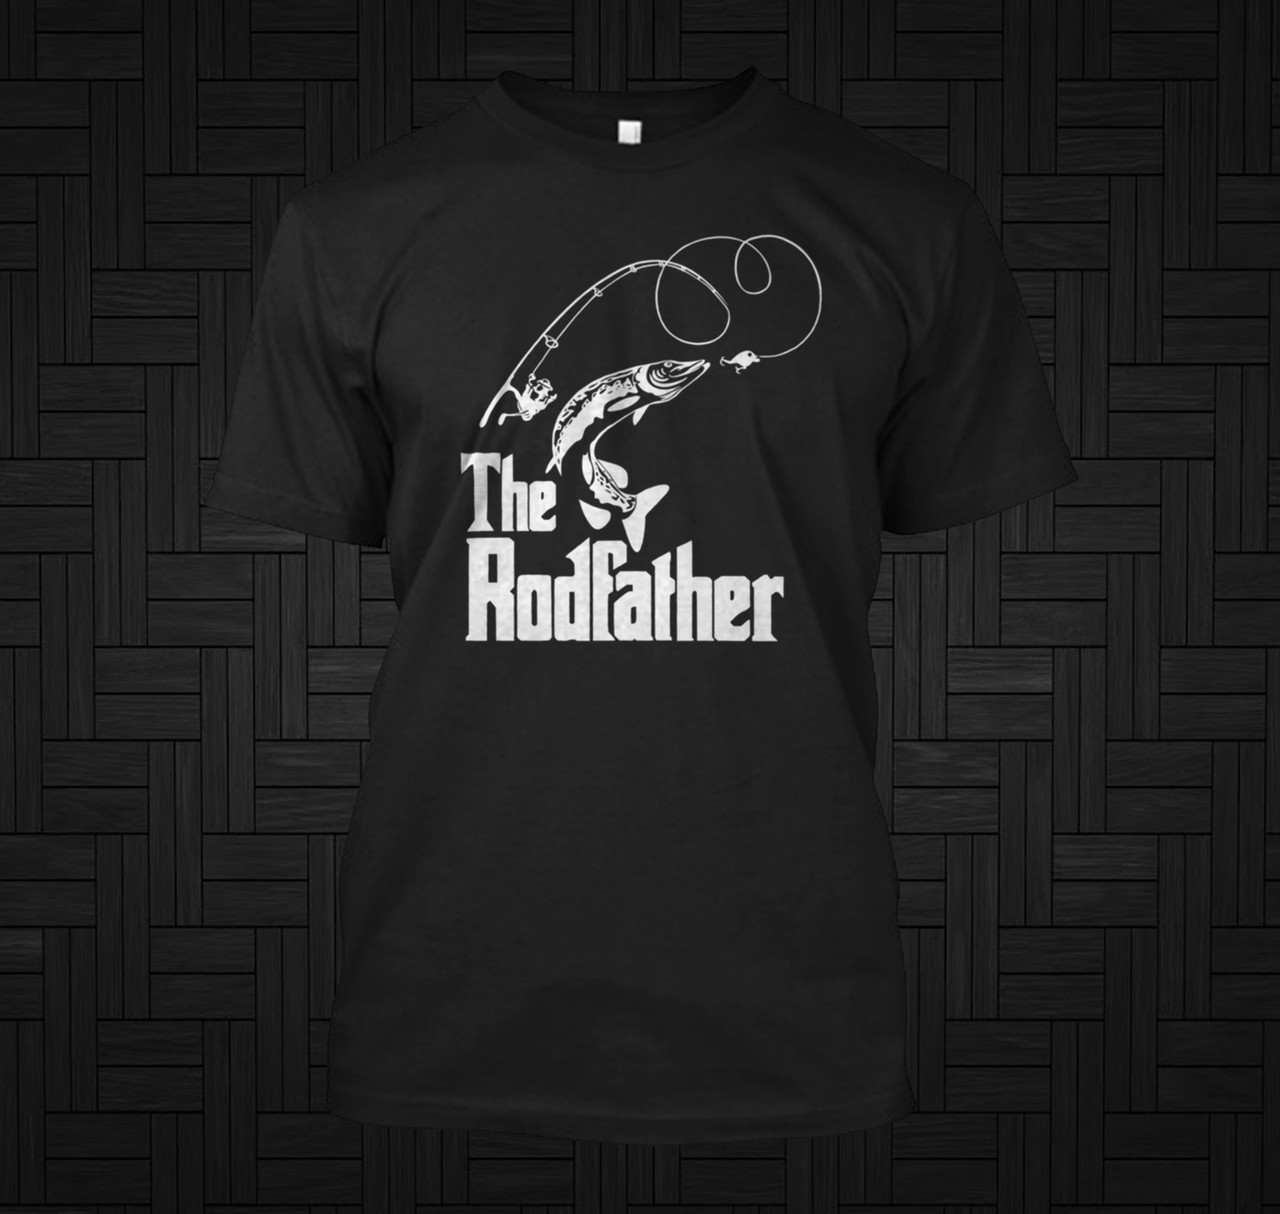 The Rodfather Fishing - Unisex T-Shirt Tee Size S-5XL - Contact Info